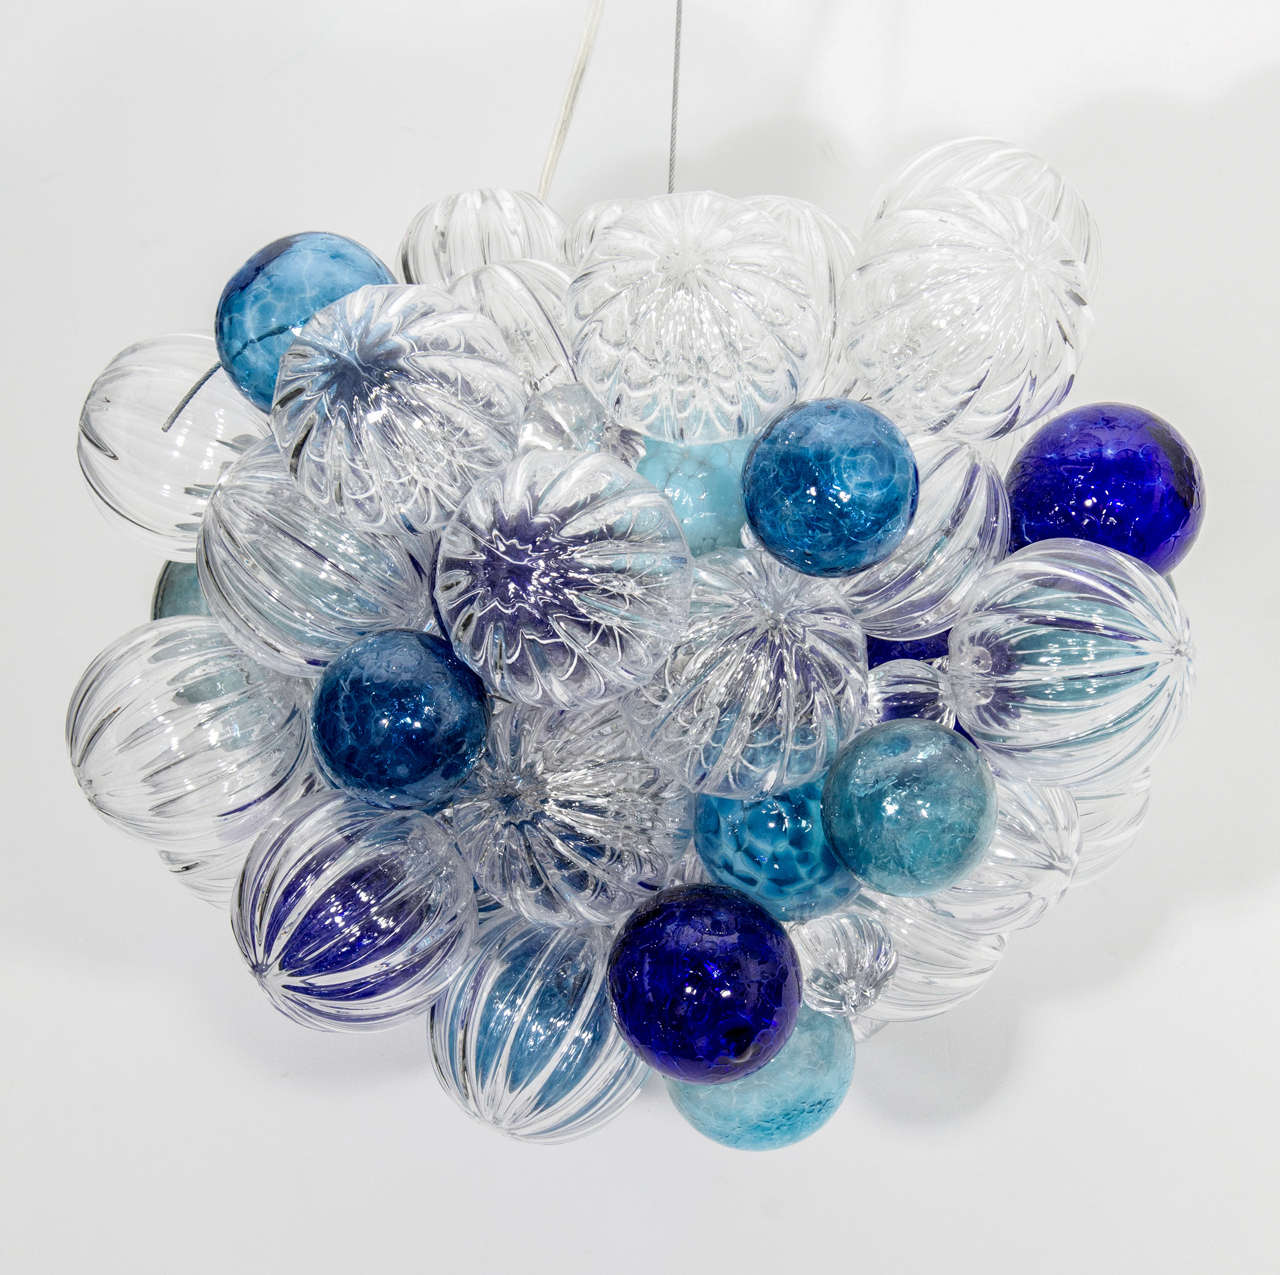 Handblown glass chandelier with glass balls of varying sizes and colors.